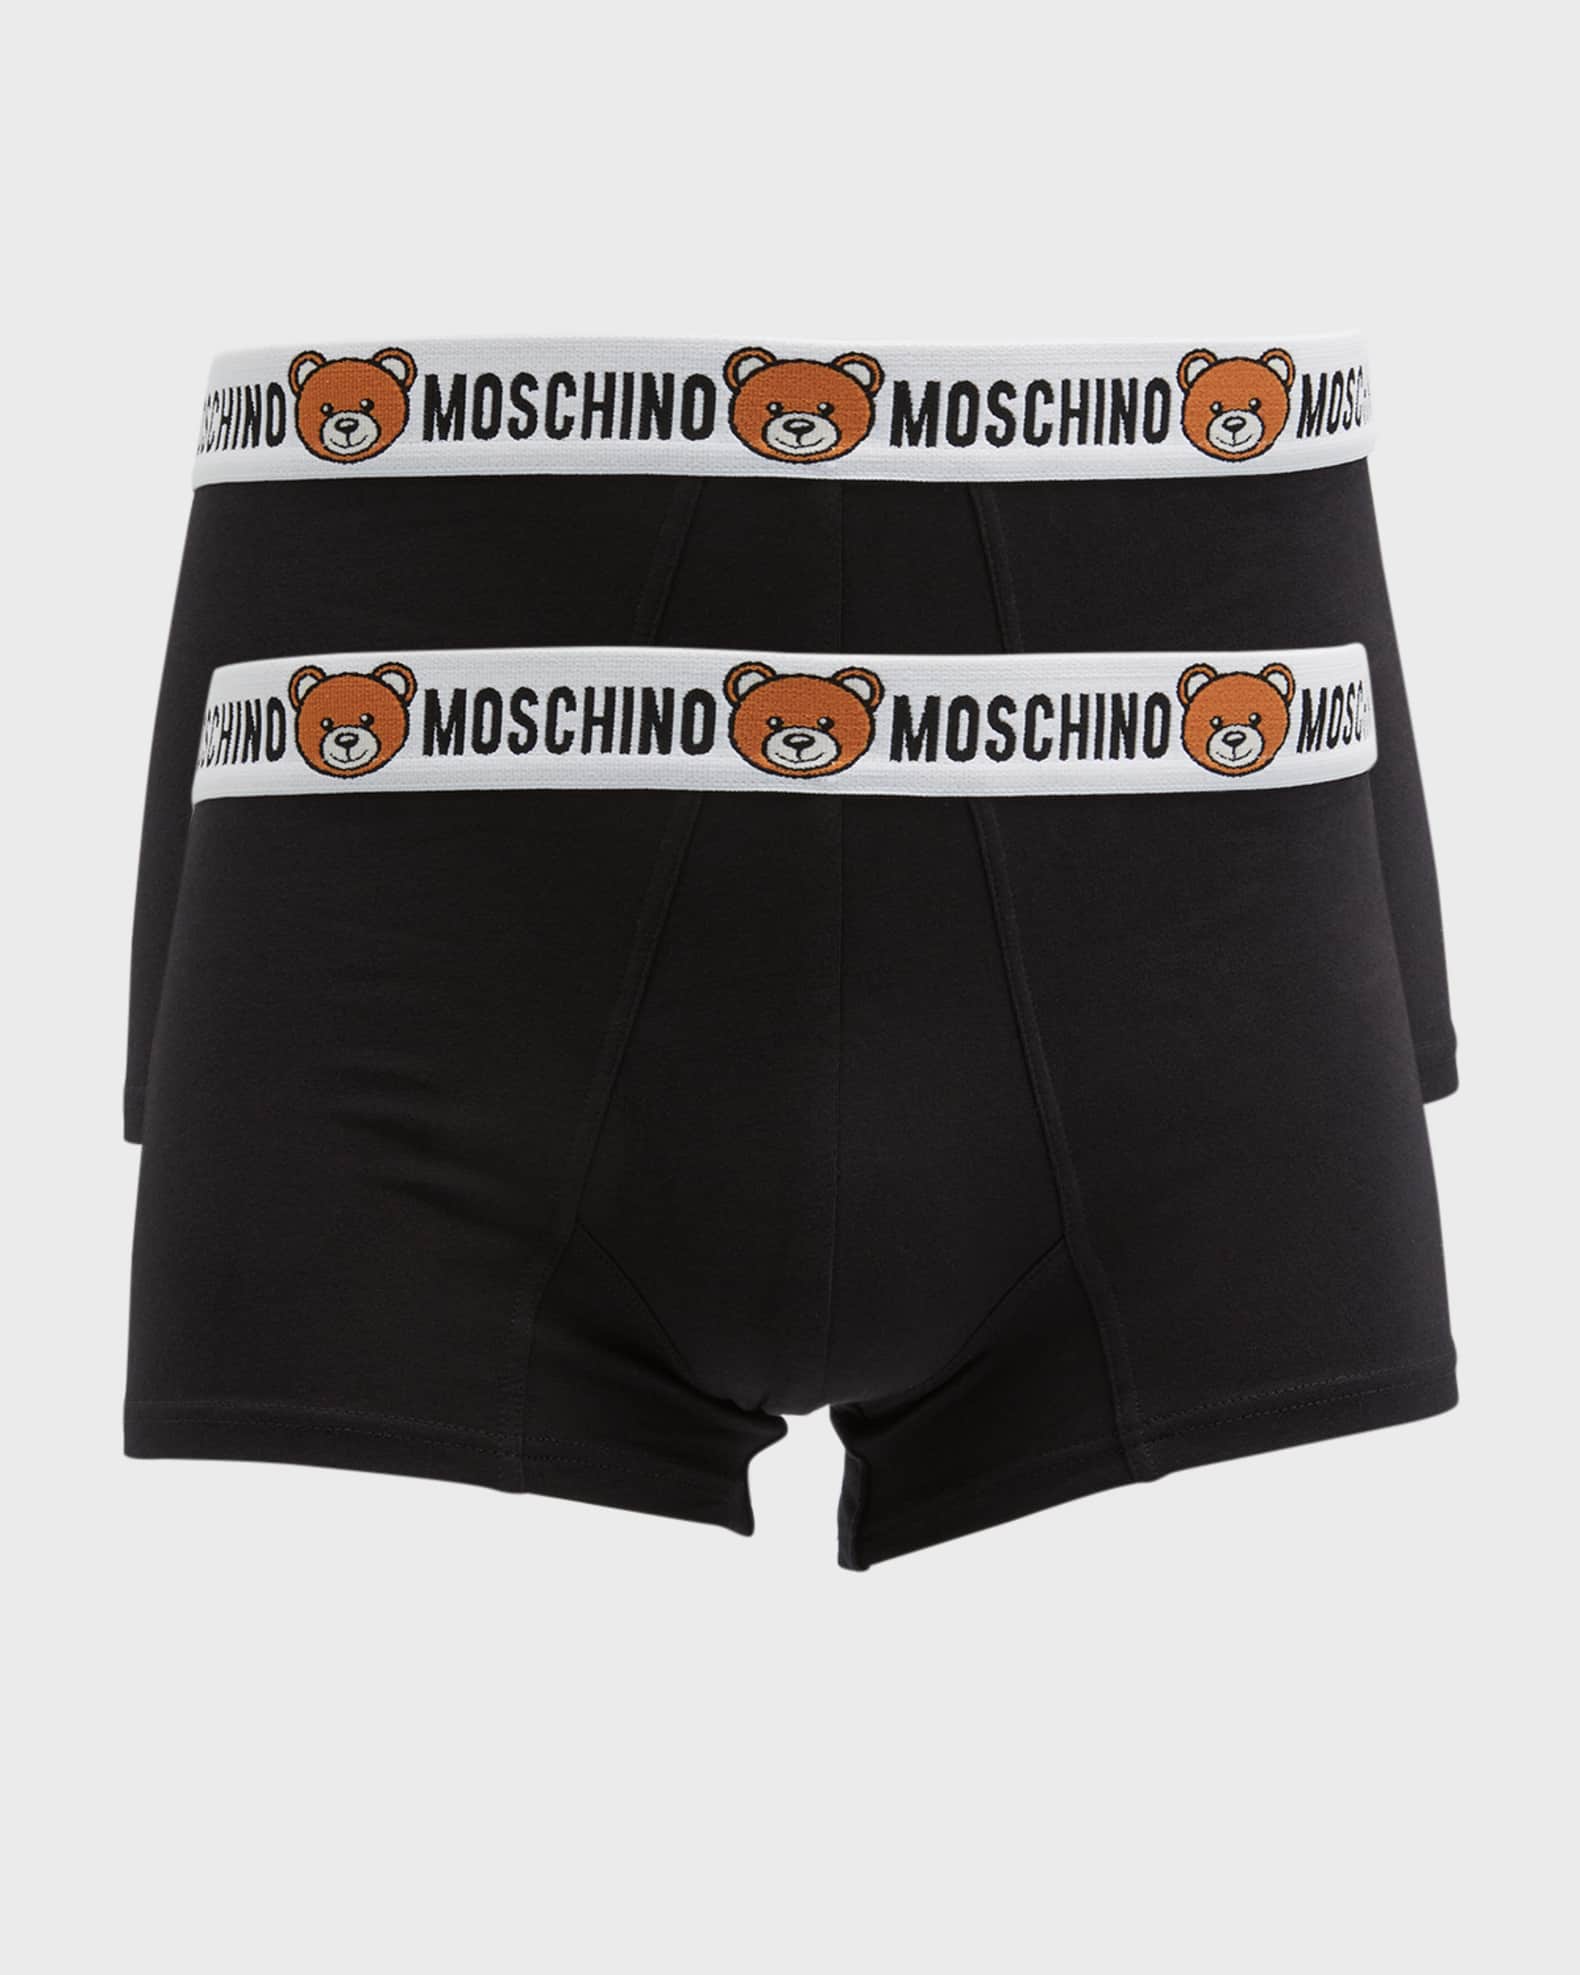 Moschino Boxers two-pack, Men's Clothing